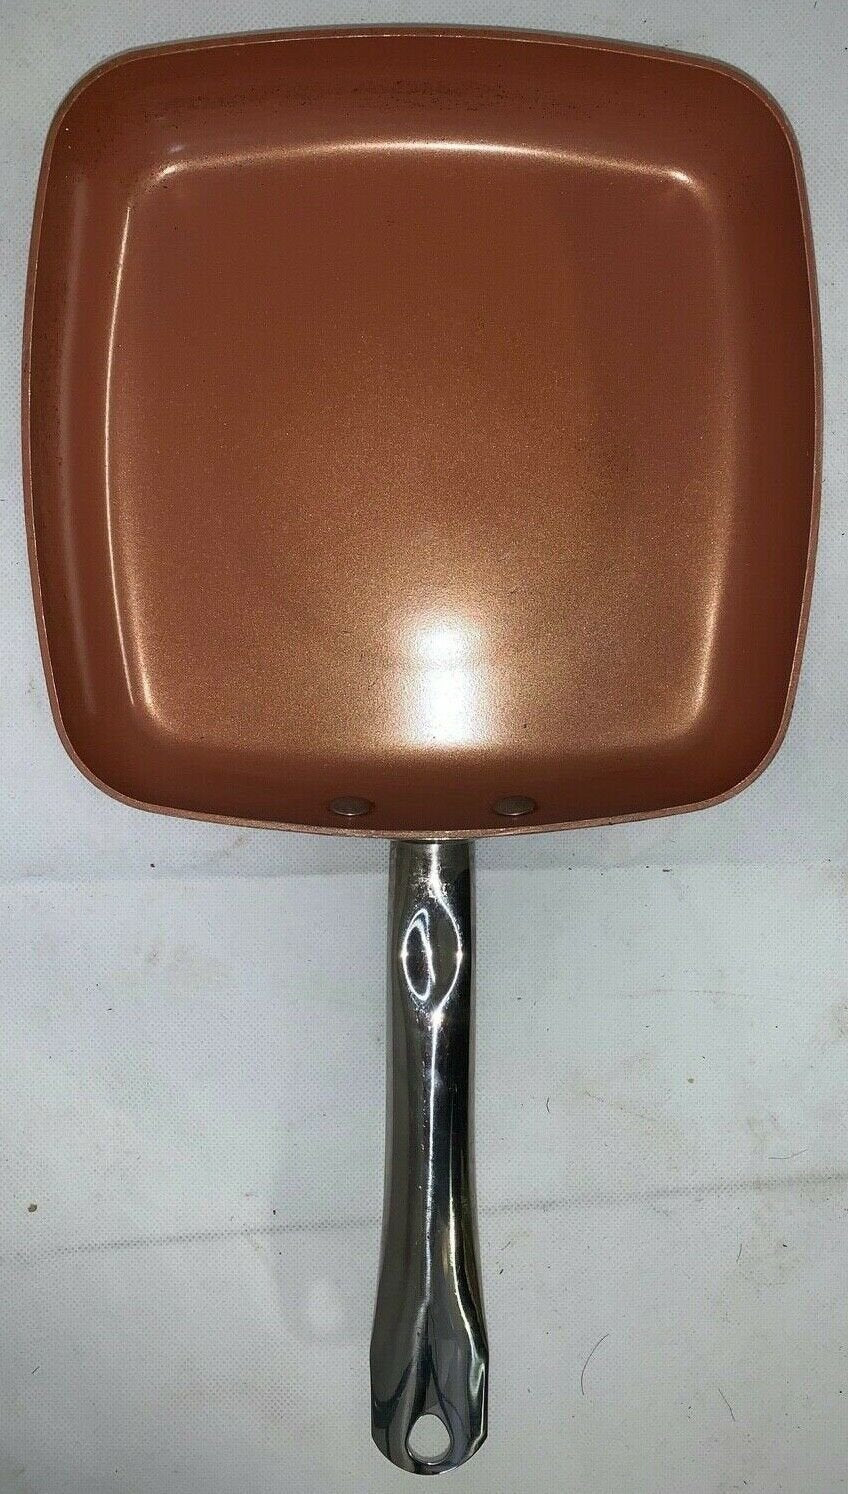 Copper Chef 9.5" x 1' Square Cooking Frying Pan With Handle